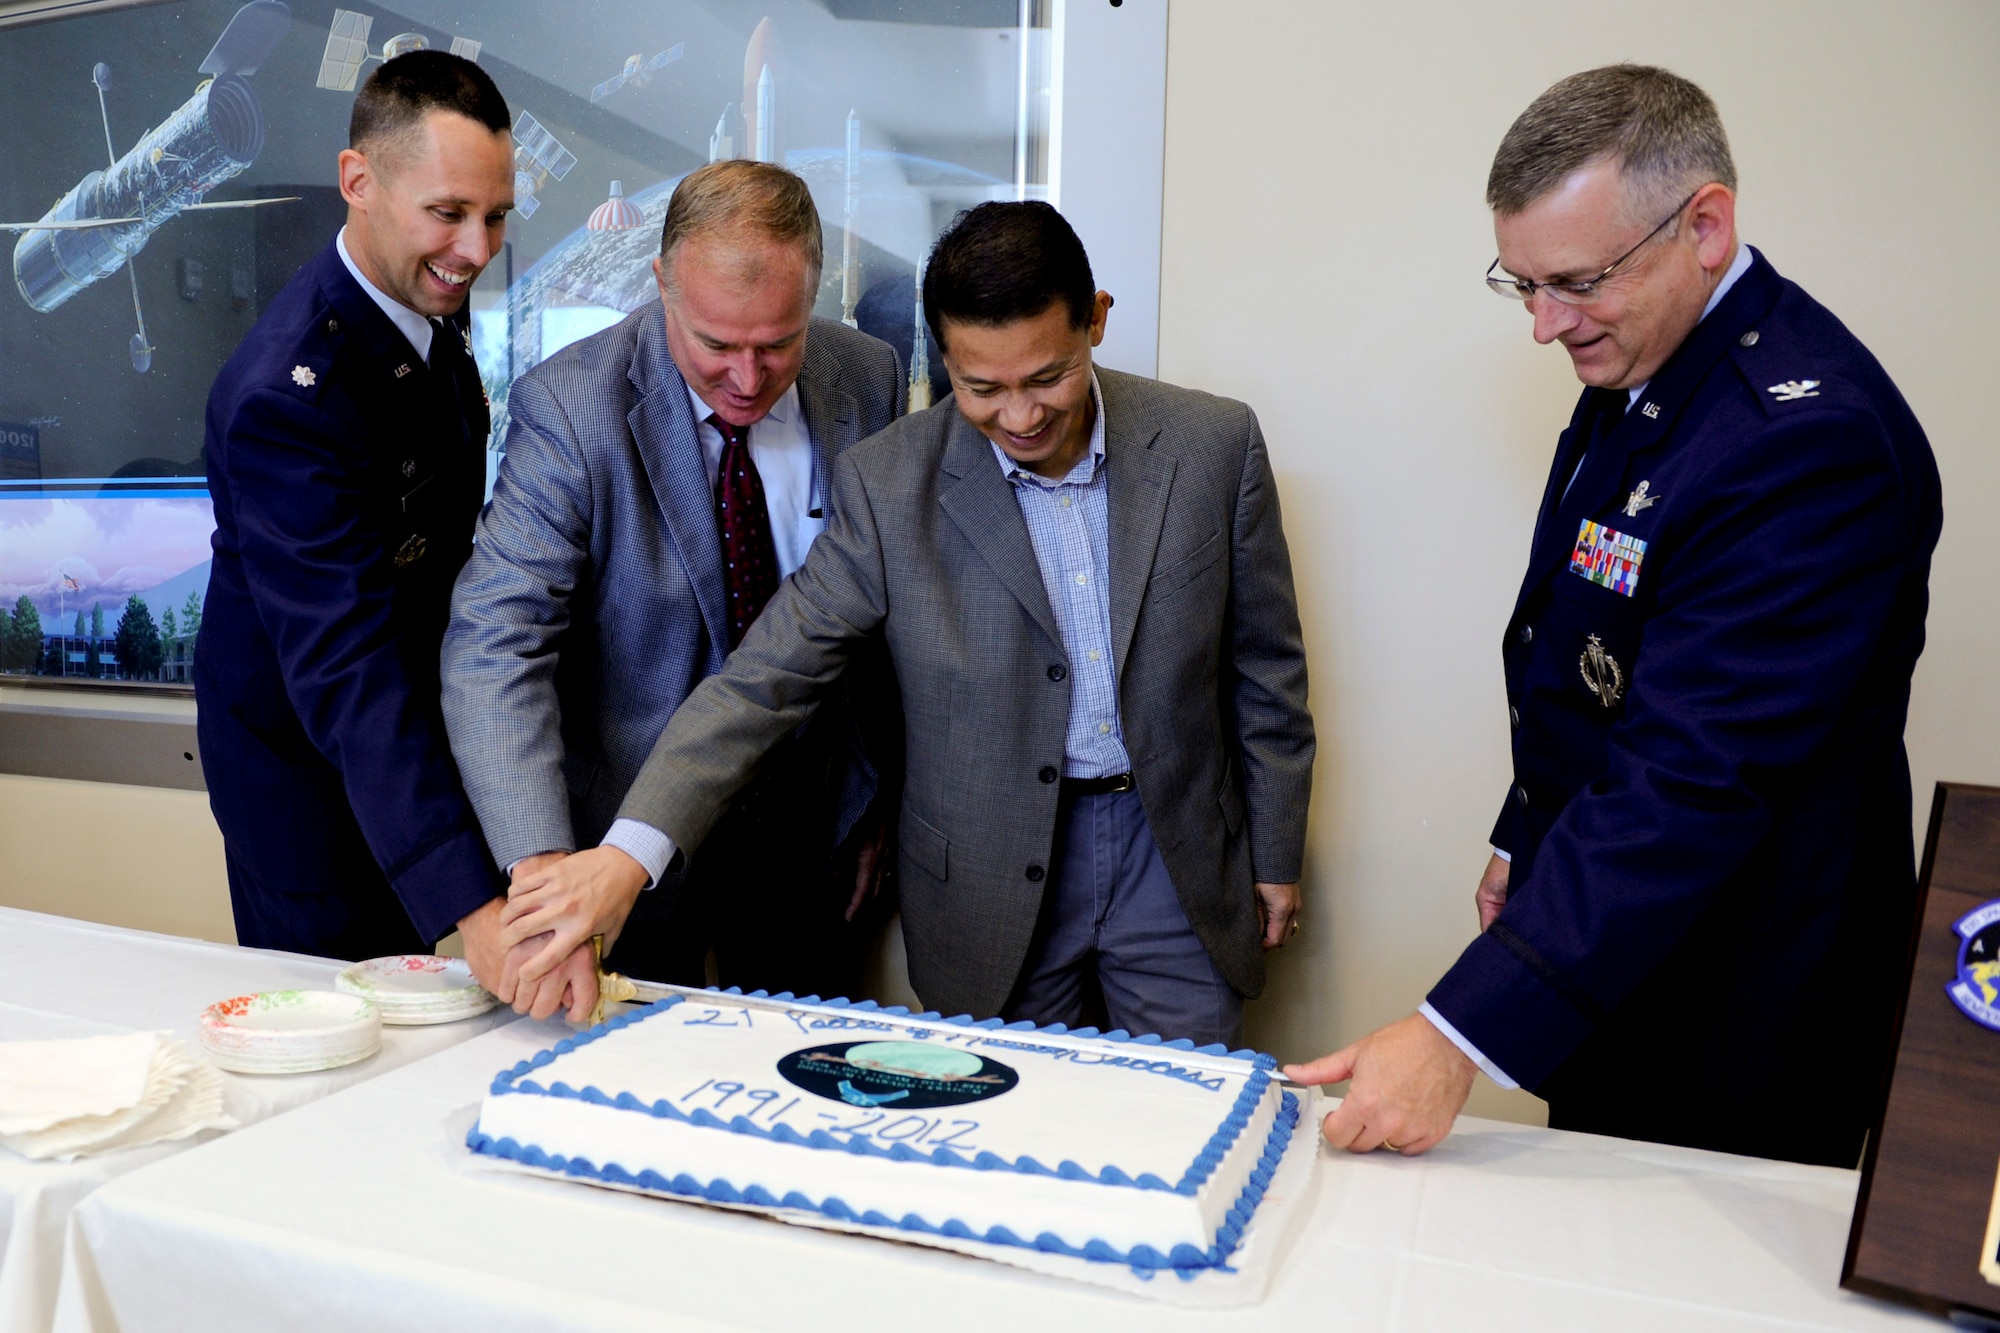 VANDENBERG AIR FORCE BASE, Calif. -- The current and former commanders of the 21st Space Operations Squadron but a birthday cake during a birthday celebration for the squadron here, Friday, Oct. 5, 2012. Active since 1991, the 21 SOPS handles the day-to-day operation and maintenance of the Air Force Satellite Control Network as well as ground antennas and monitoring stations. (U.S. Air Force photo/Staff Sgt. Levi Riendeau)
